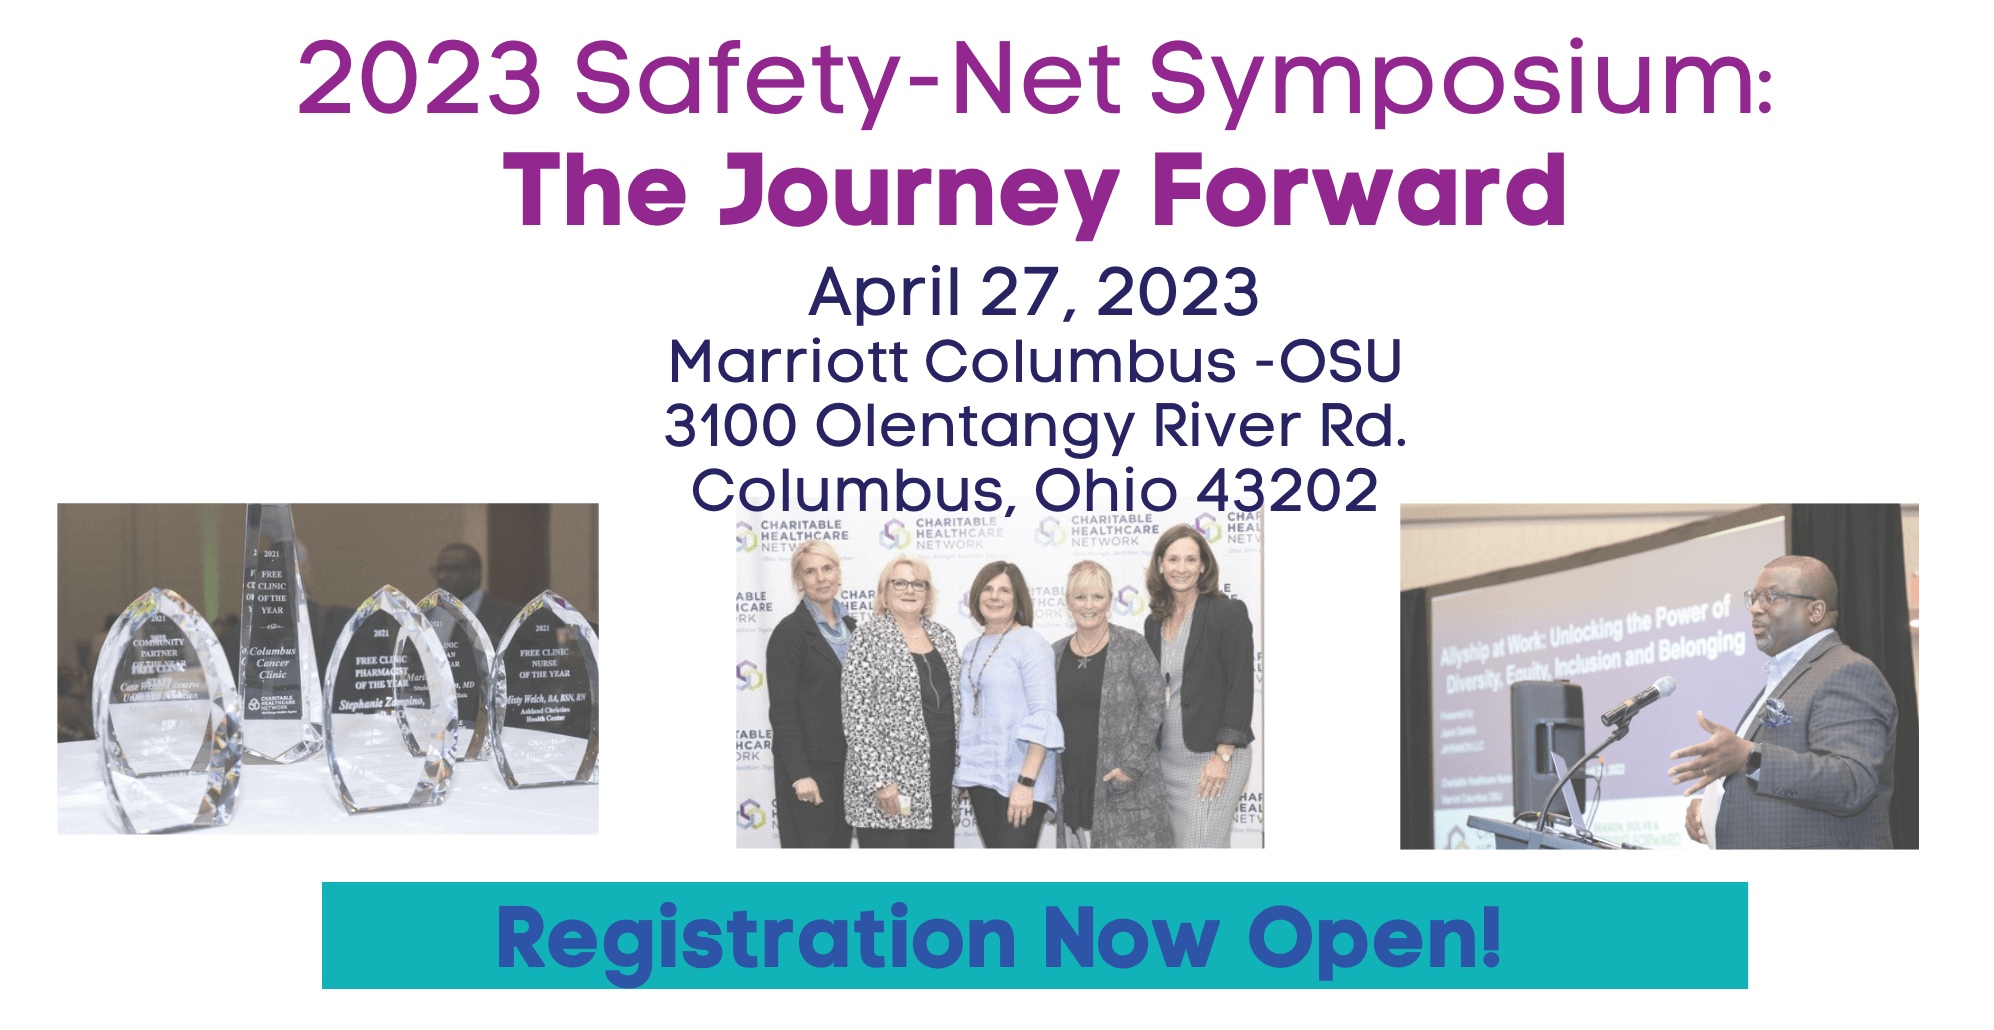 Join us for the 2023 Safety-Net Symposium!